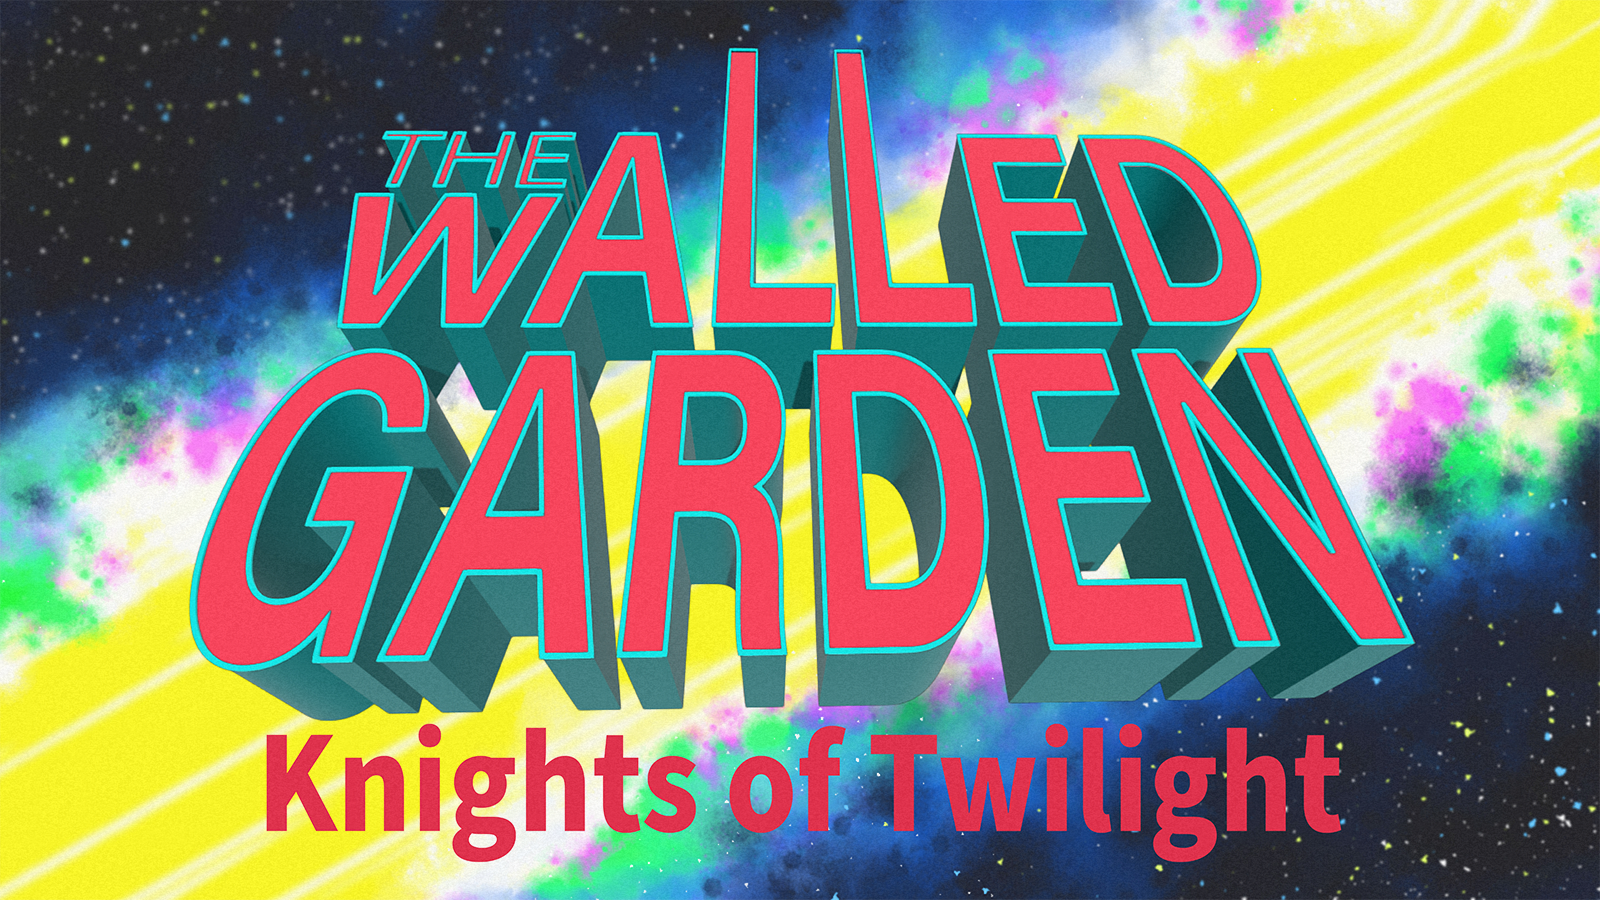 Casting Call for The Walled Garden: Knights of Twilight